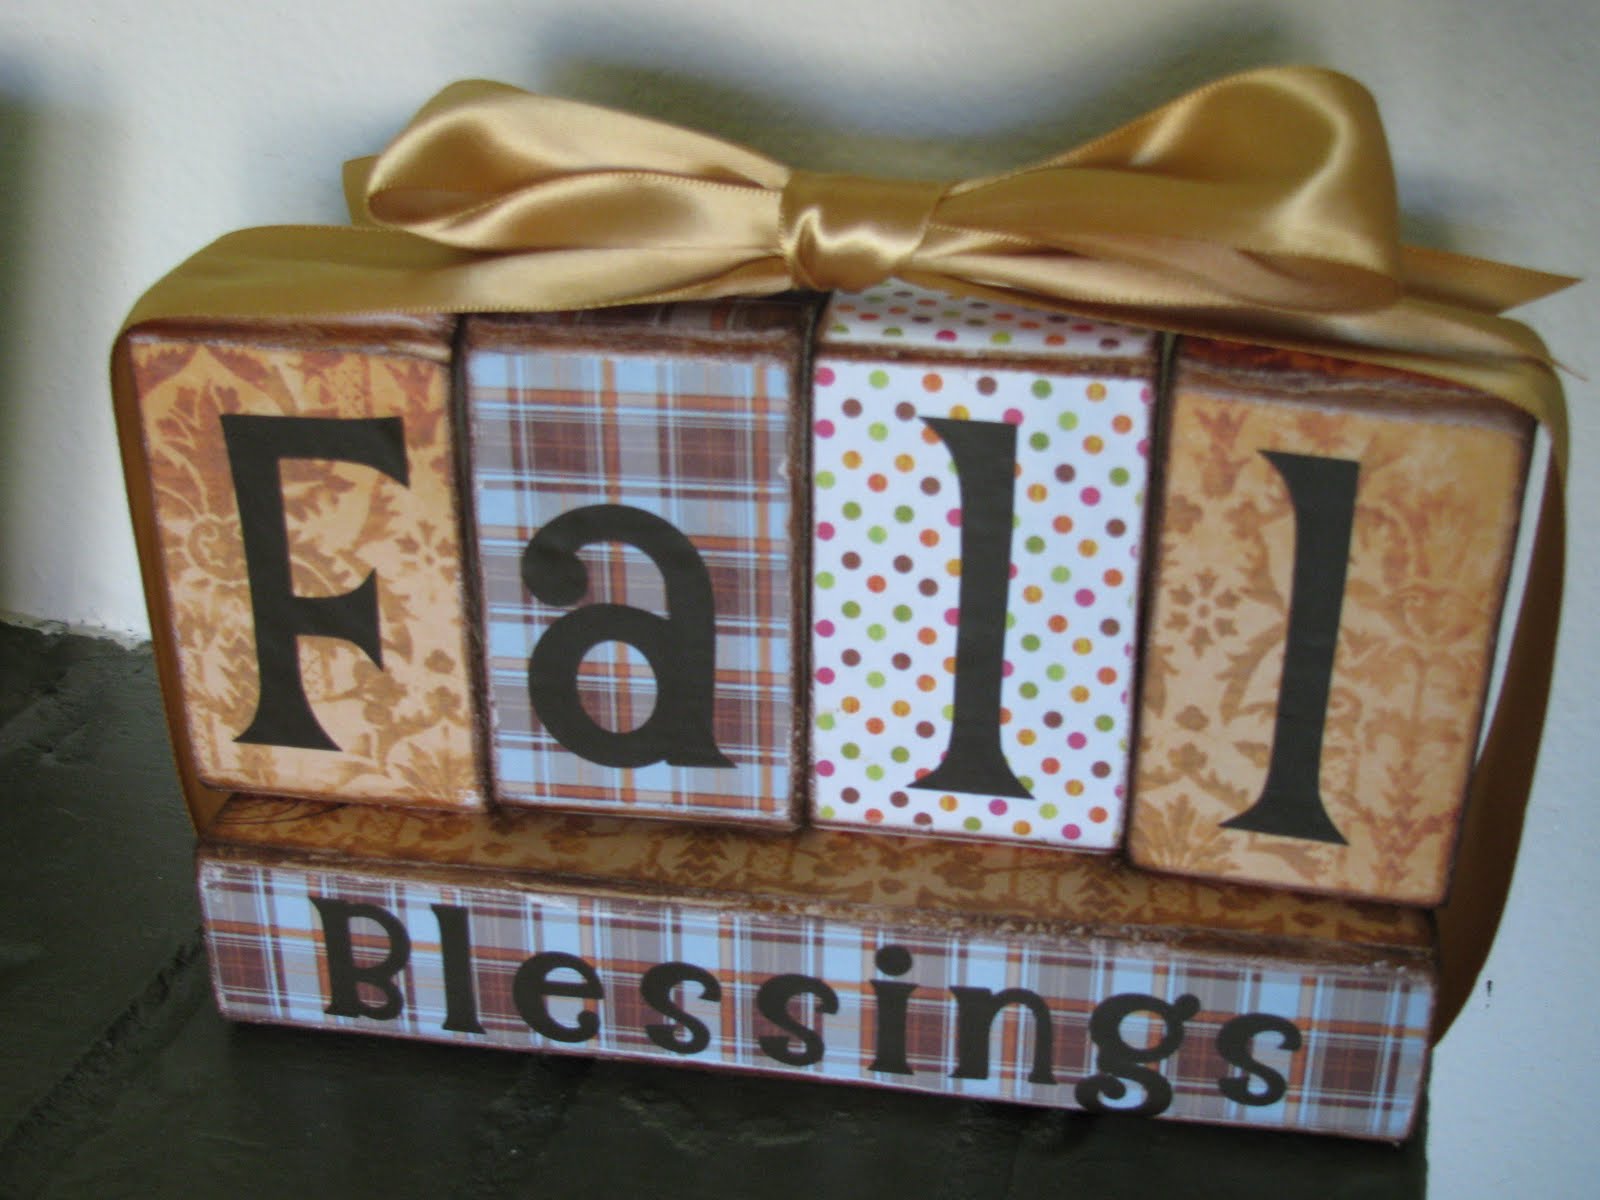 My Crafty Playground: Fall Blessings/Give Thanks Wood block decor